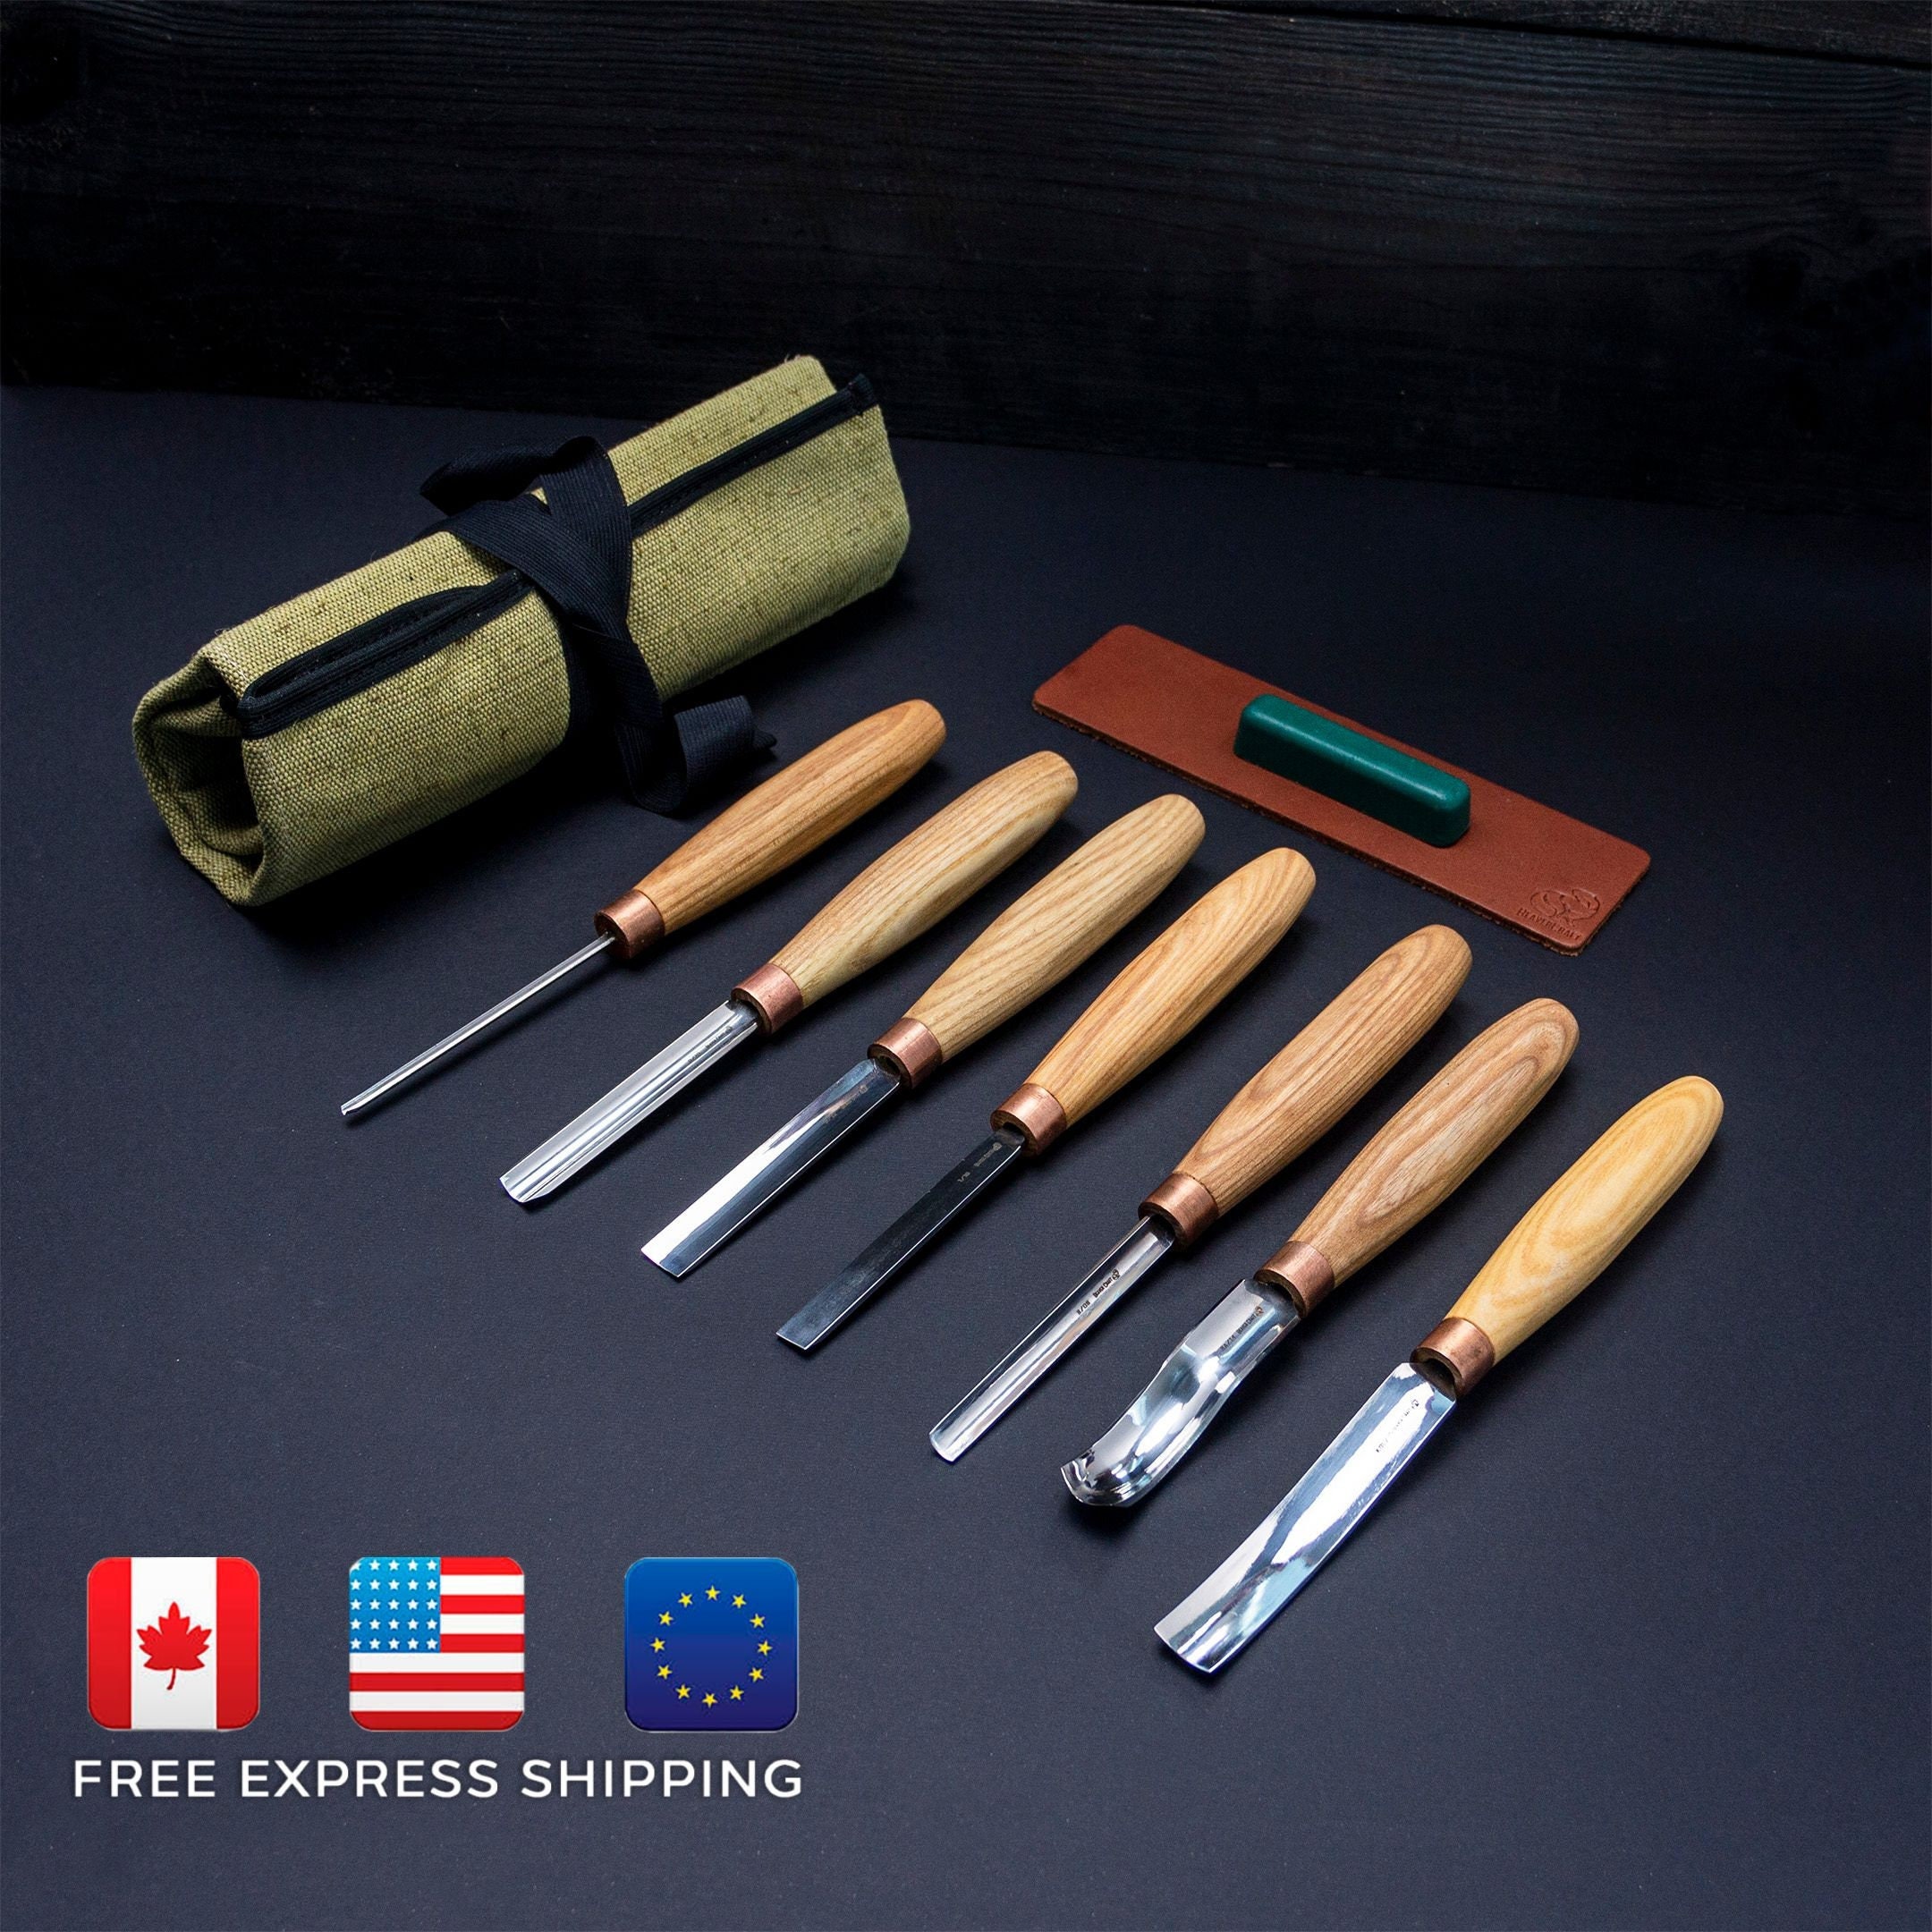 Wood carving set of 10 palm chisels professional wood carving set wood  carving